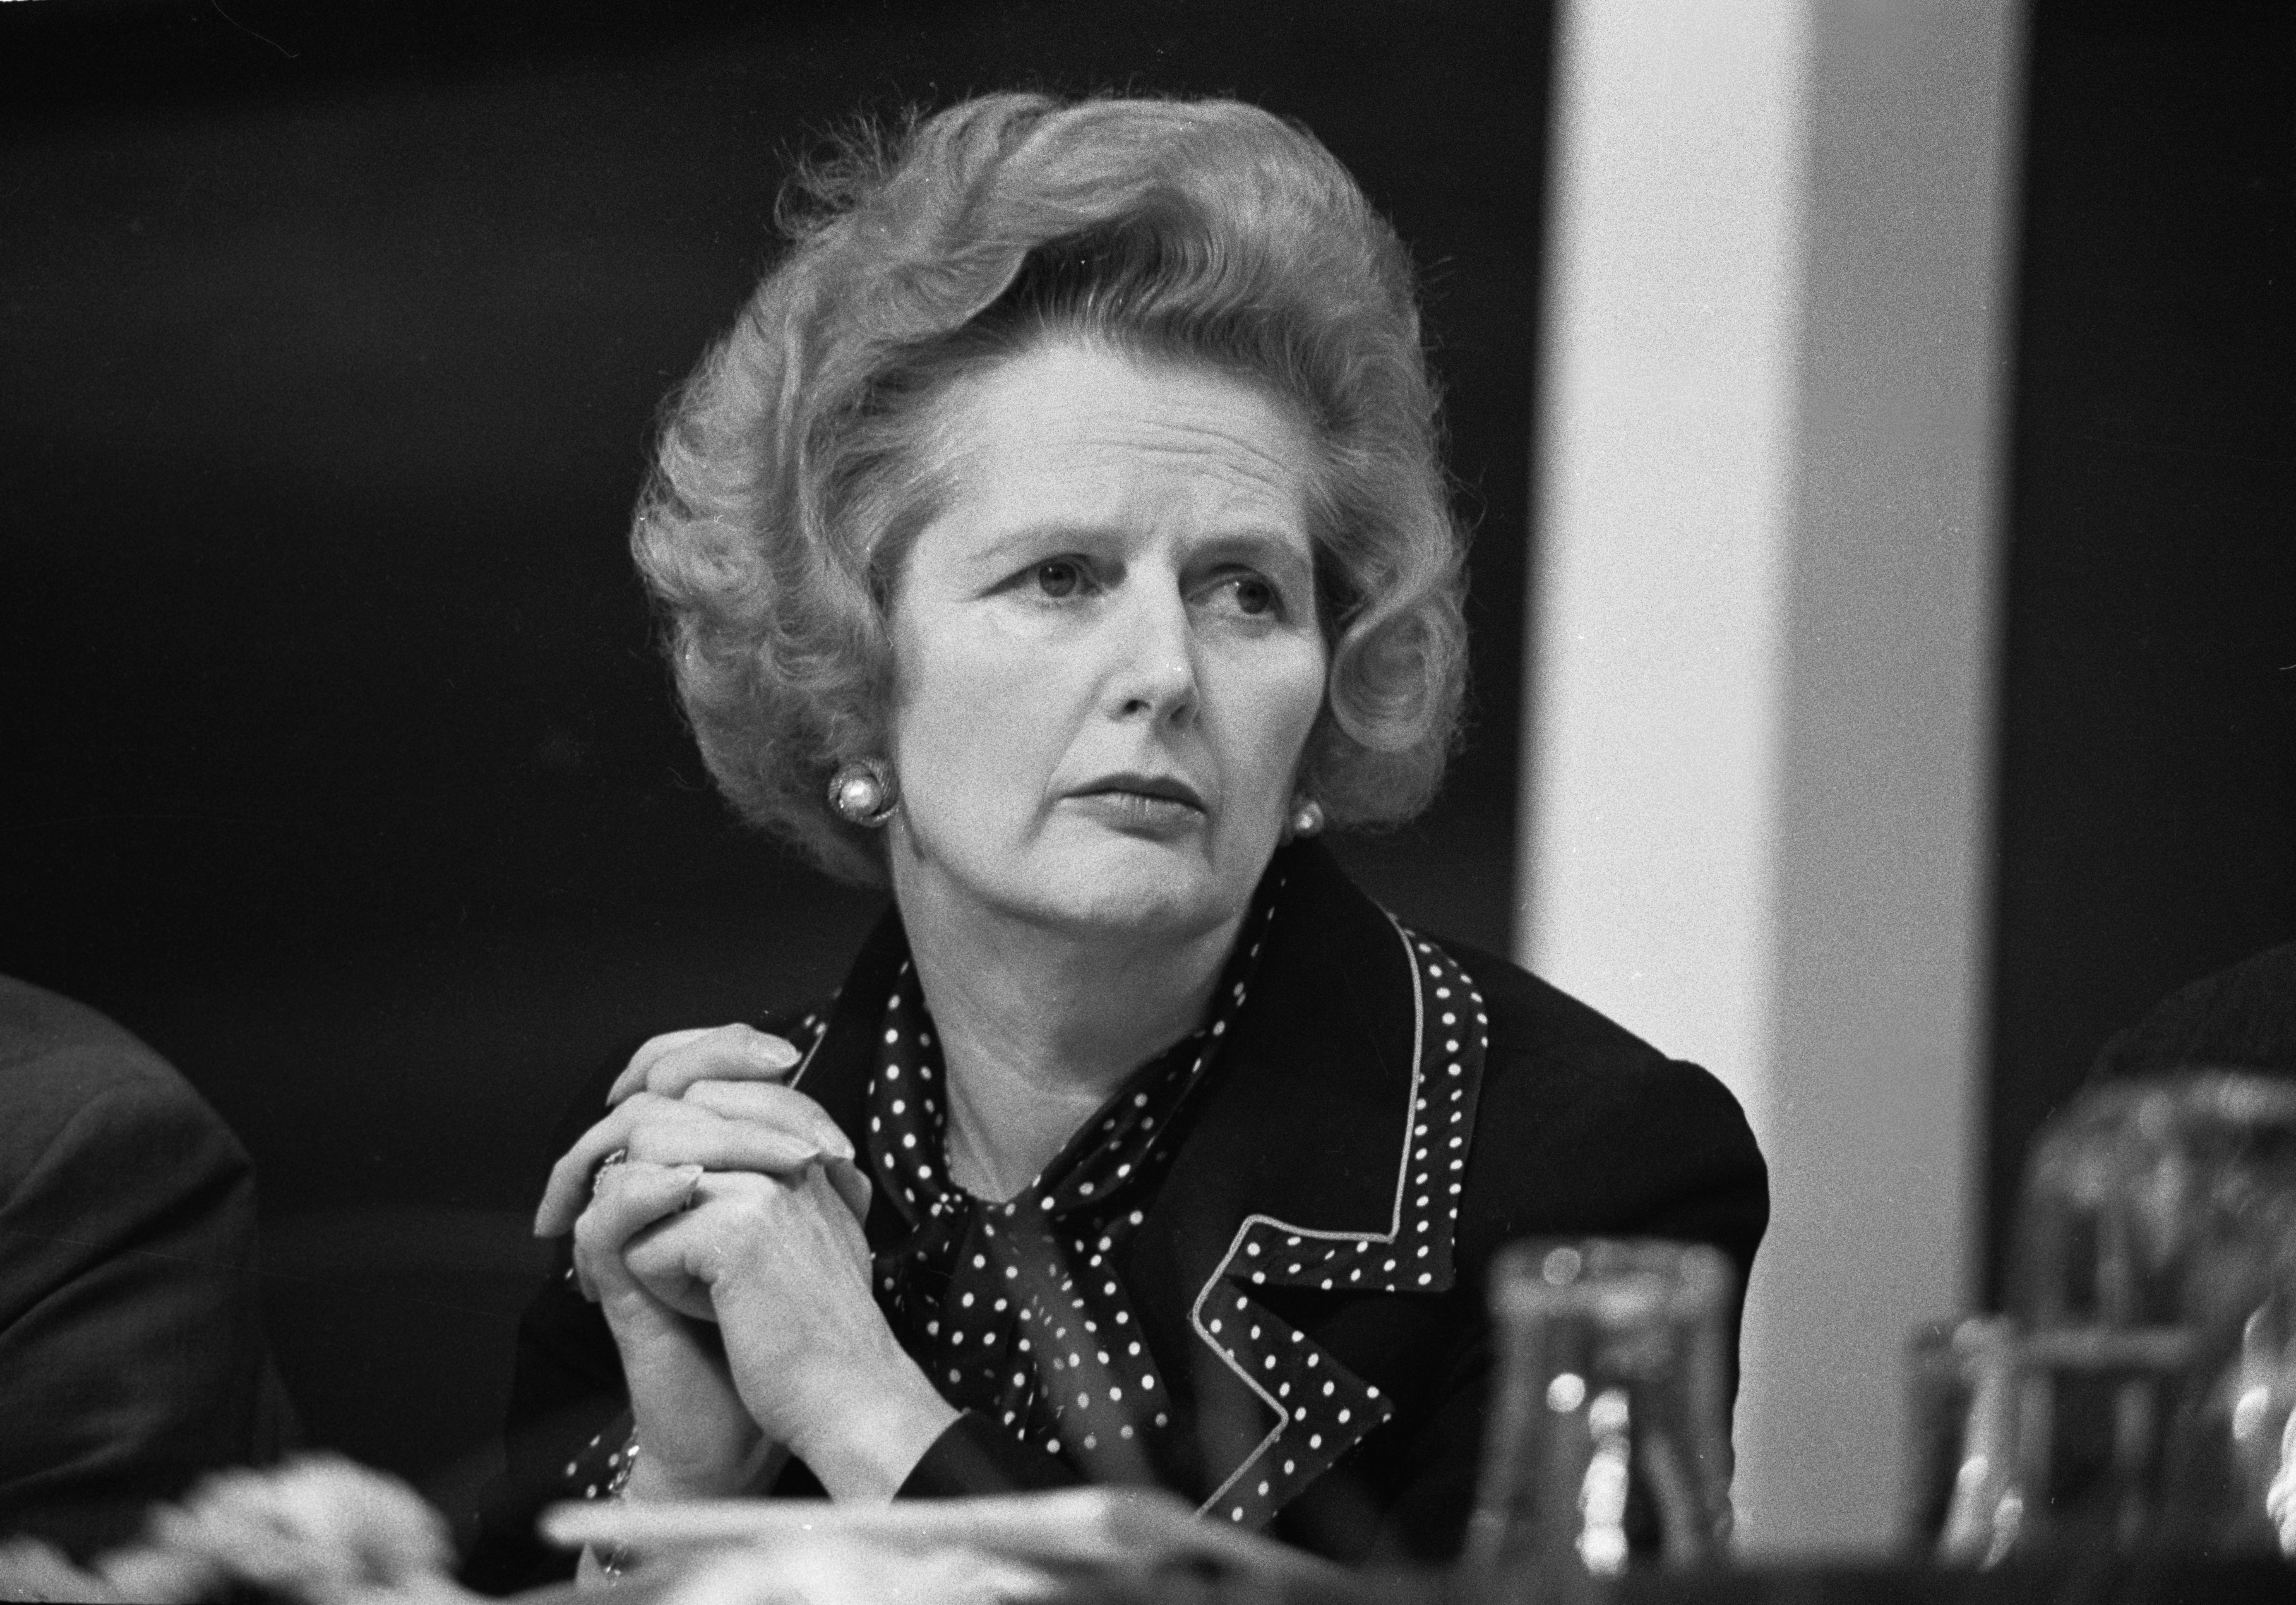 In the late 1980s Thatcher used her platform as a world leader to draw attention a number of environmental issues.